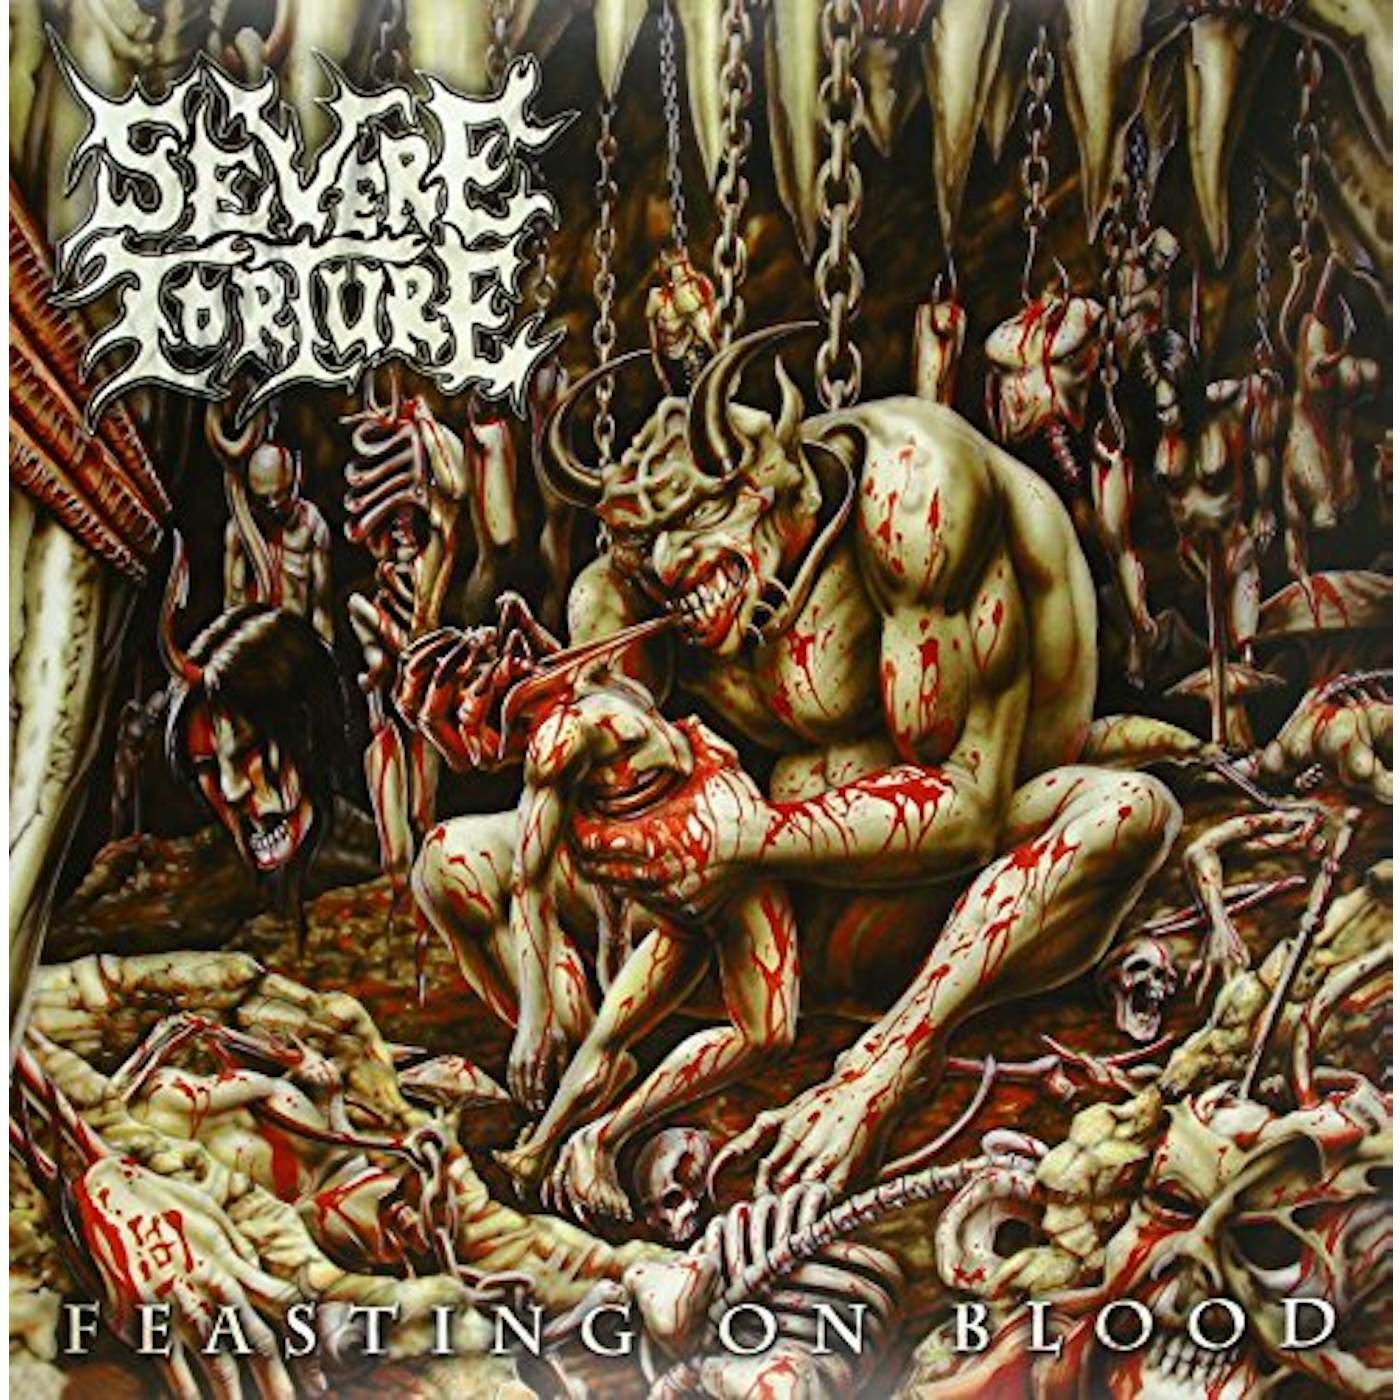 Severe Torture Feasting On Blood Vinyl Record